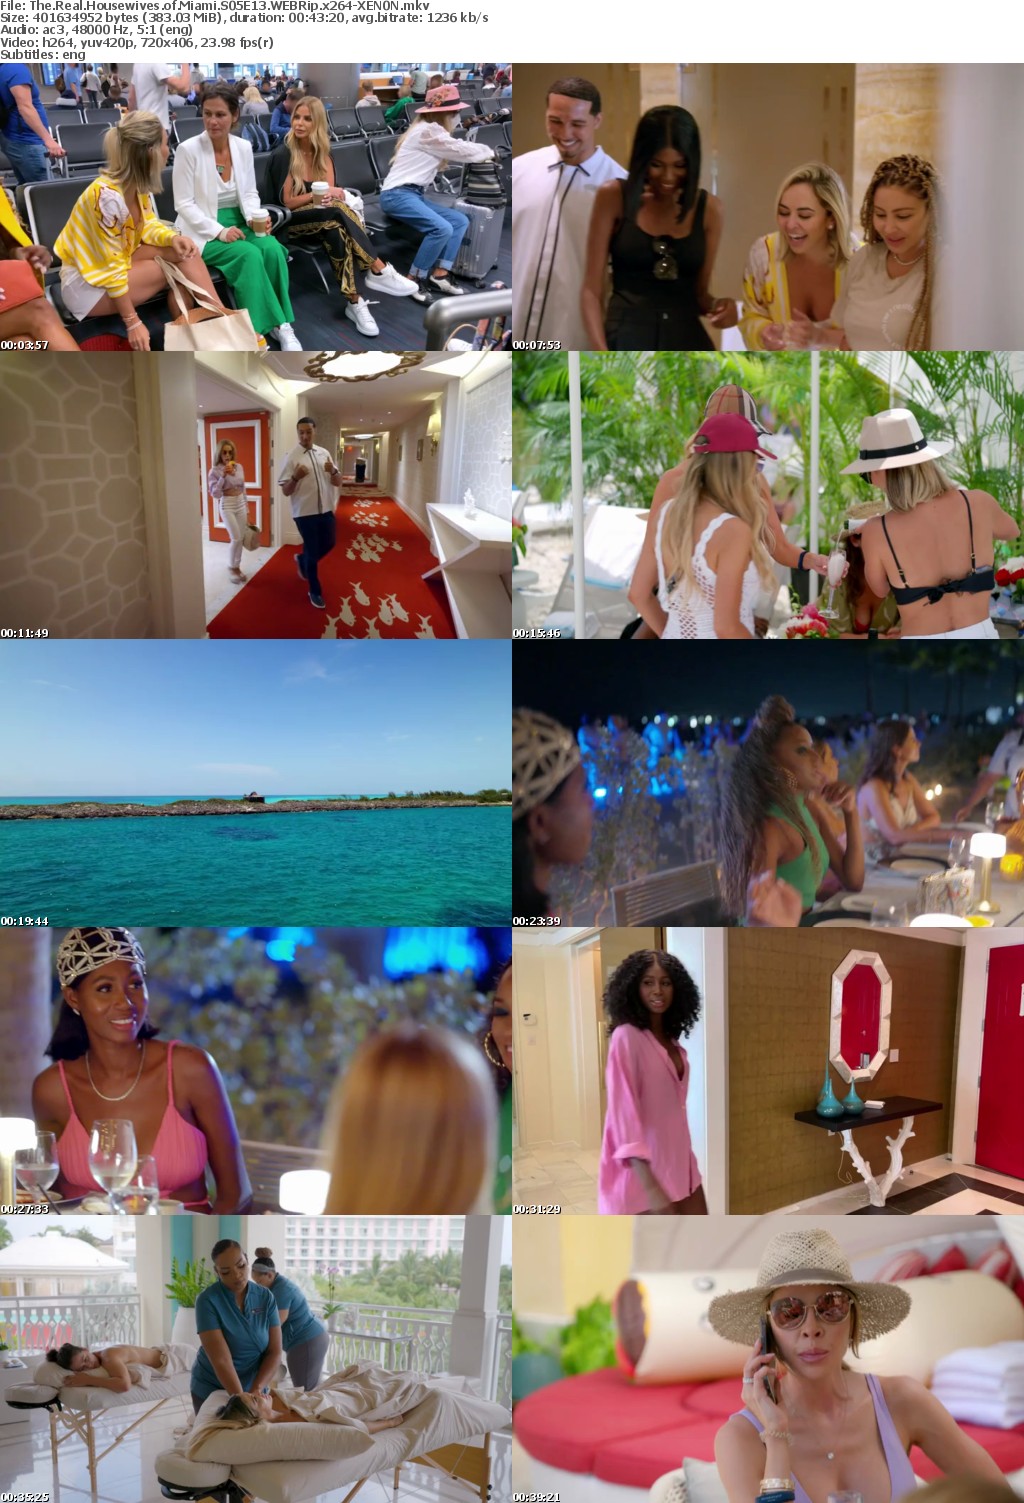 The Real Housewives of Miami S05E13 WEBRip x264-XEN0N